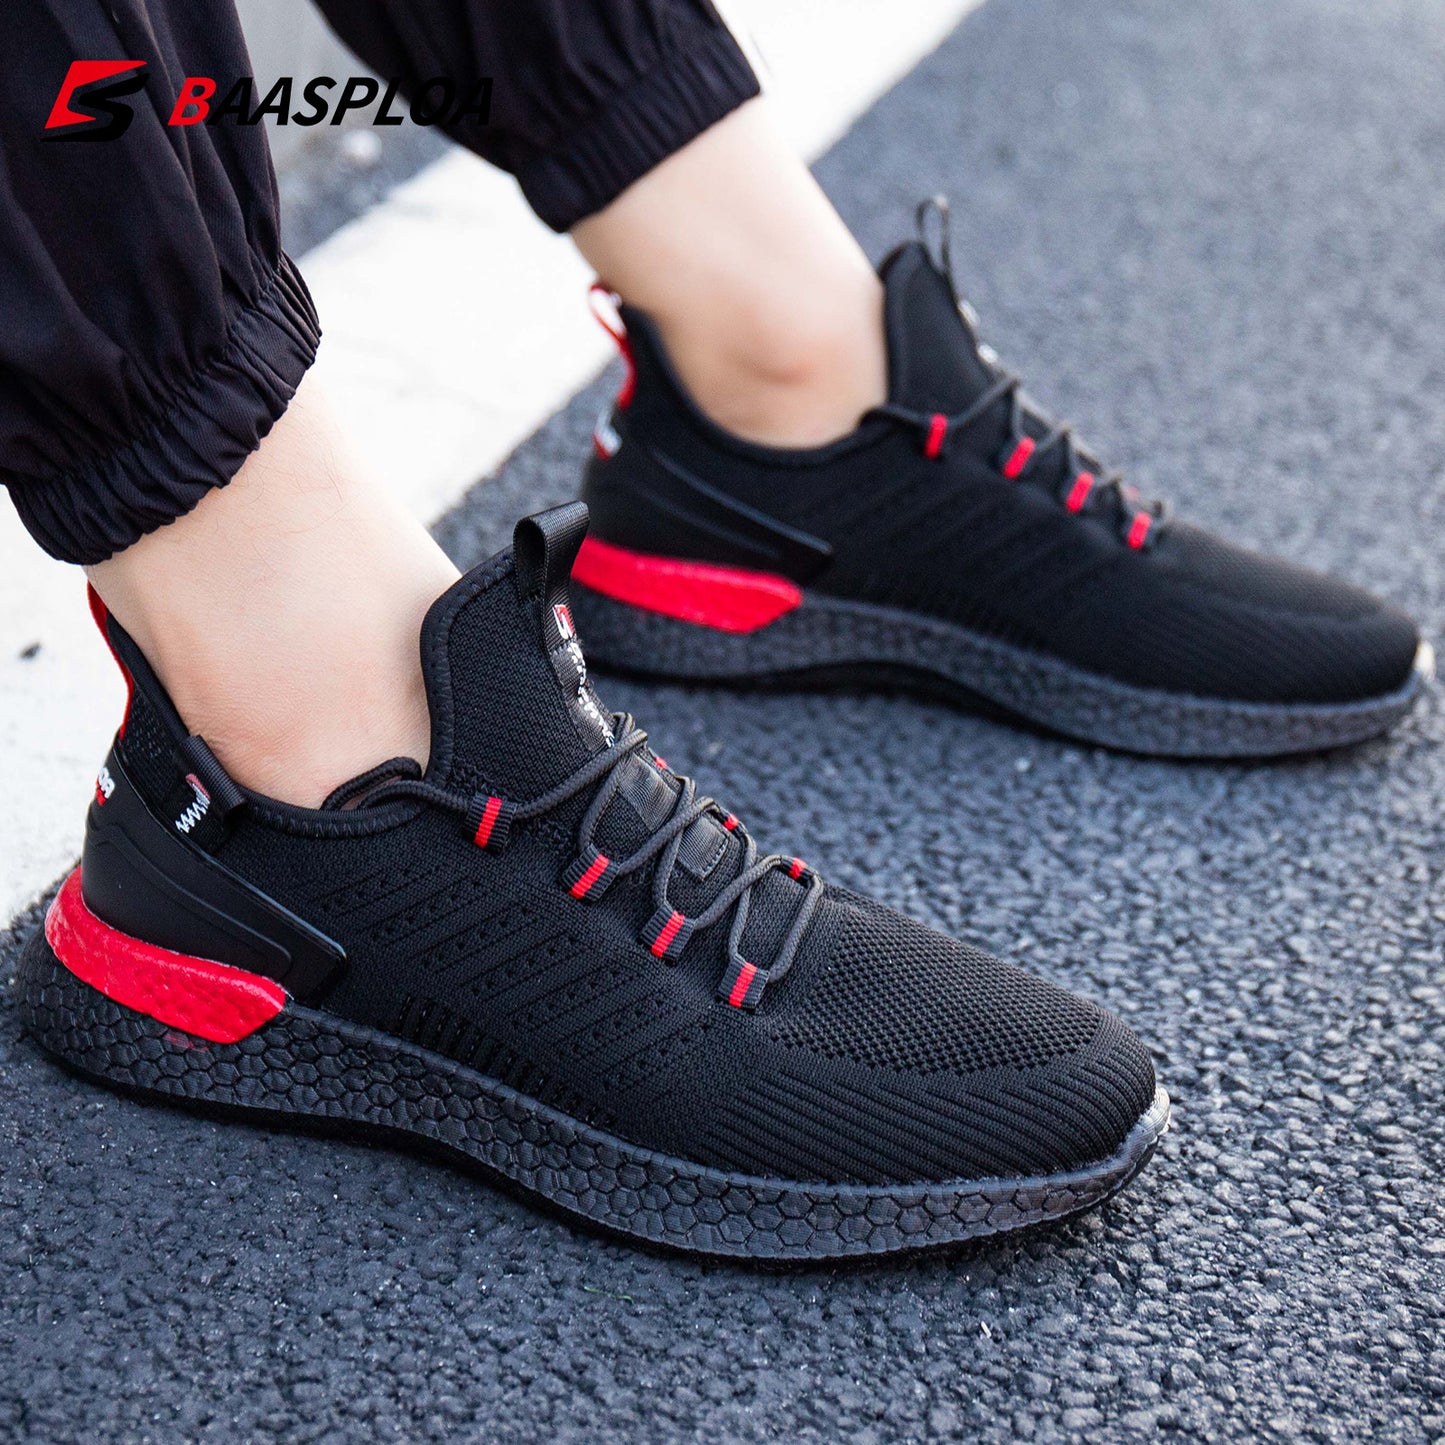 Men's Women's Running Shoes Breathable Trendy Sneakers Casual Light Walking Shoes Comfortable Athletic Training Footwear The Clothing Company Sydney